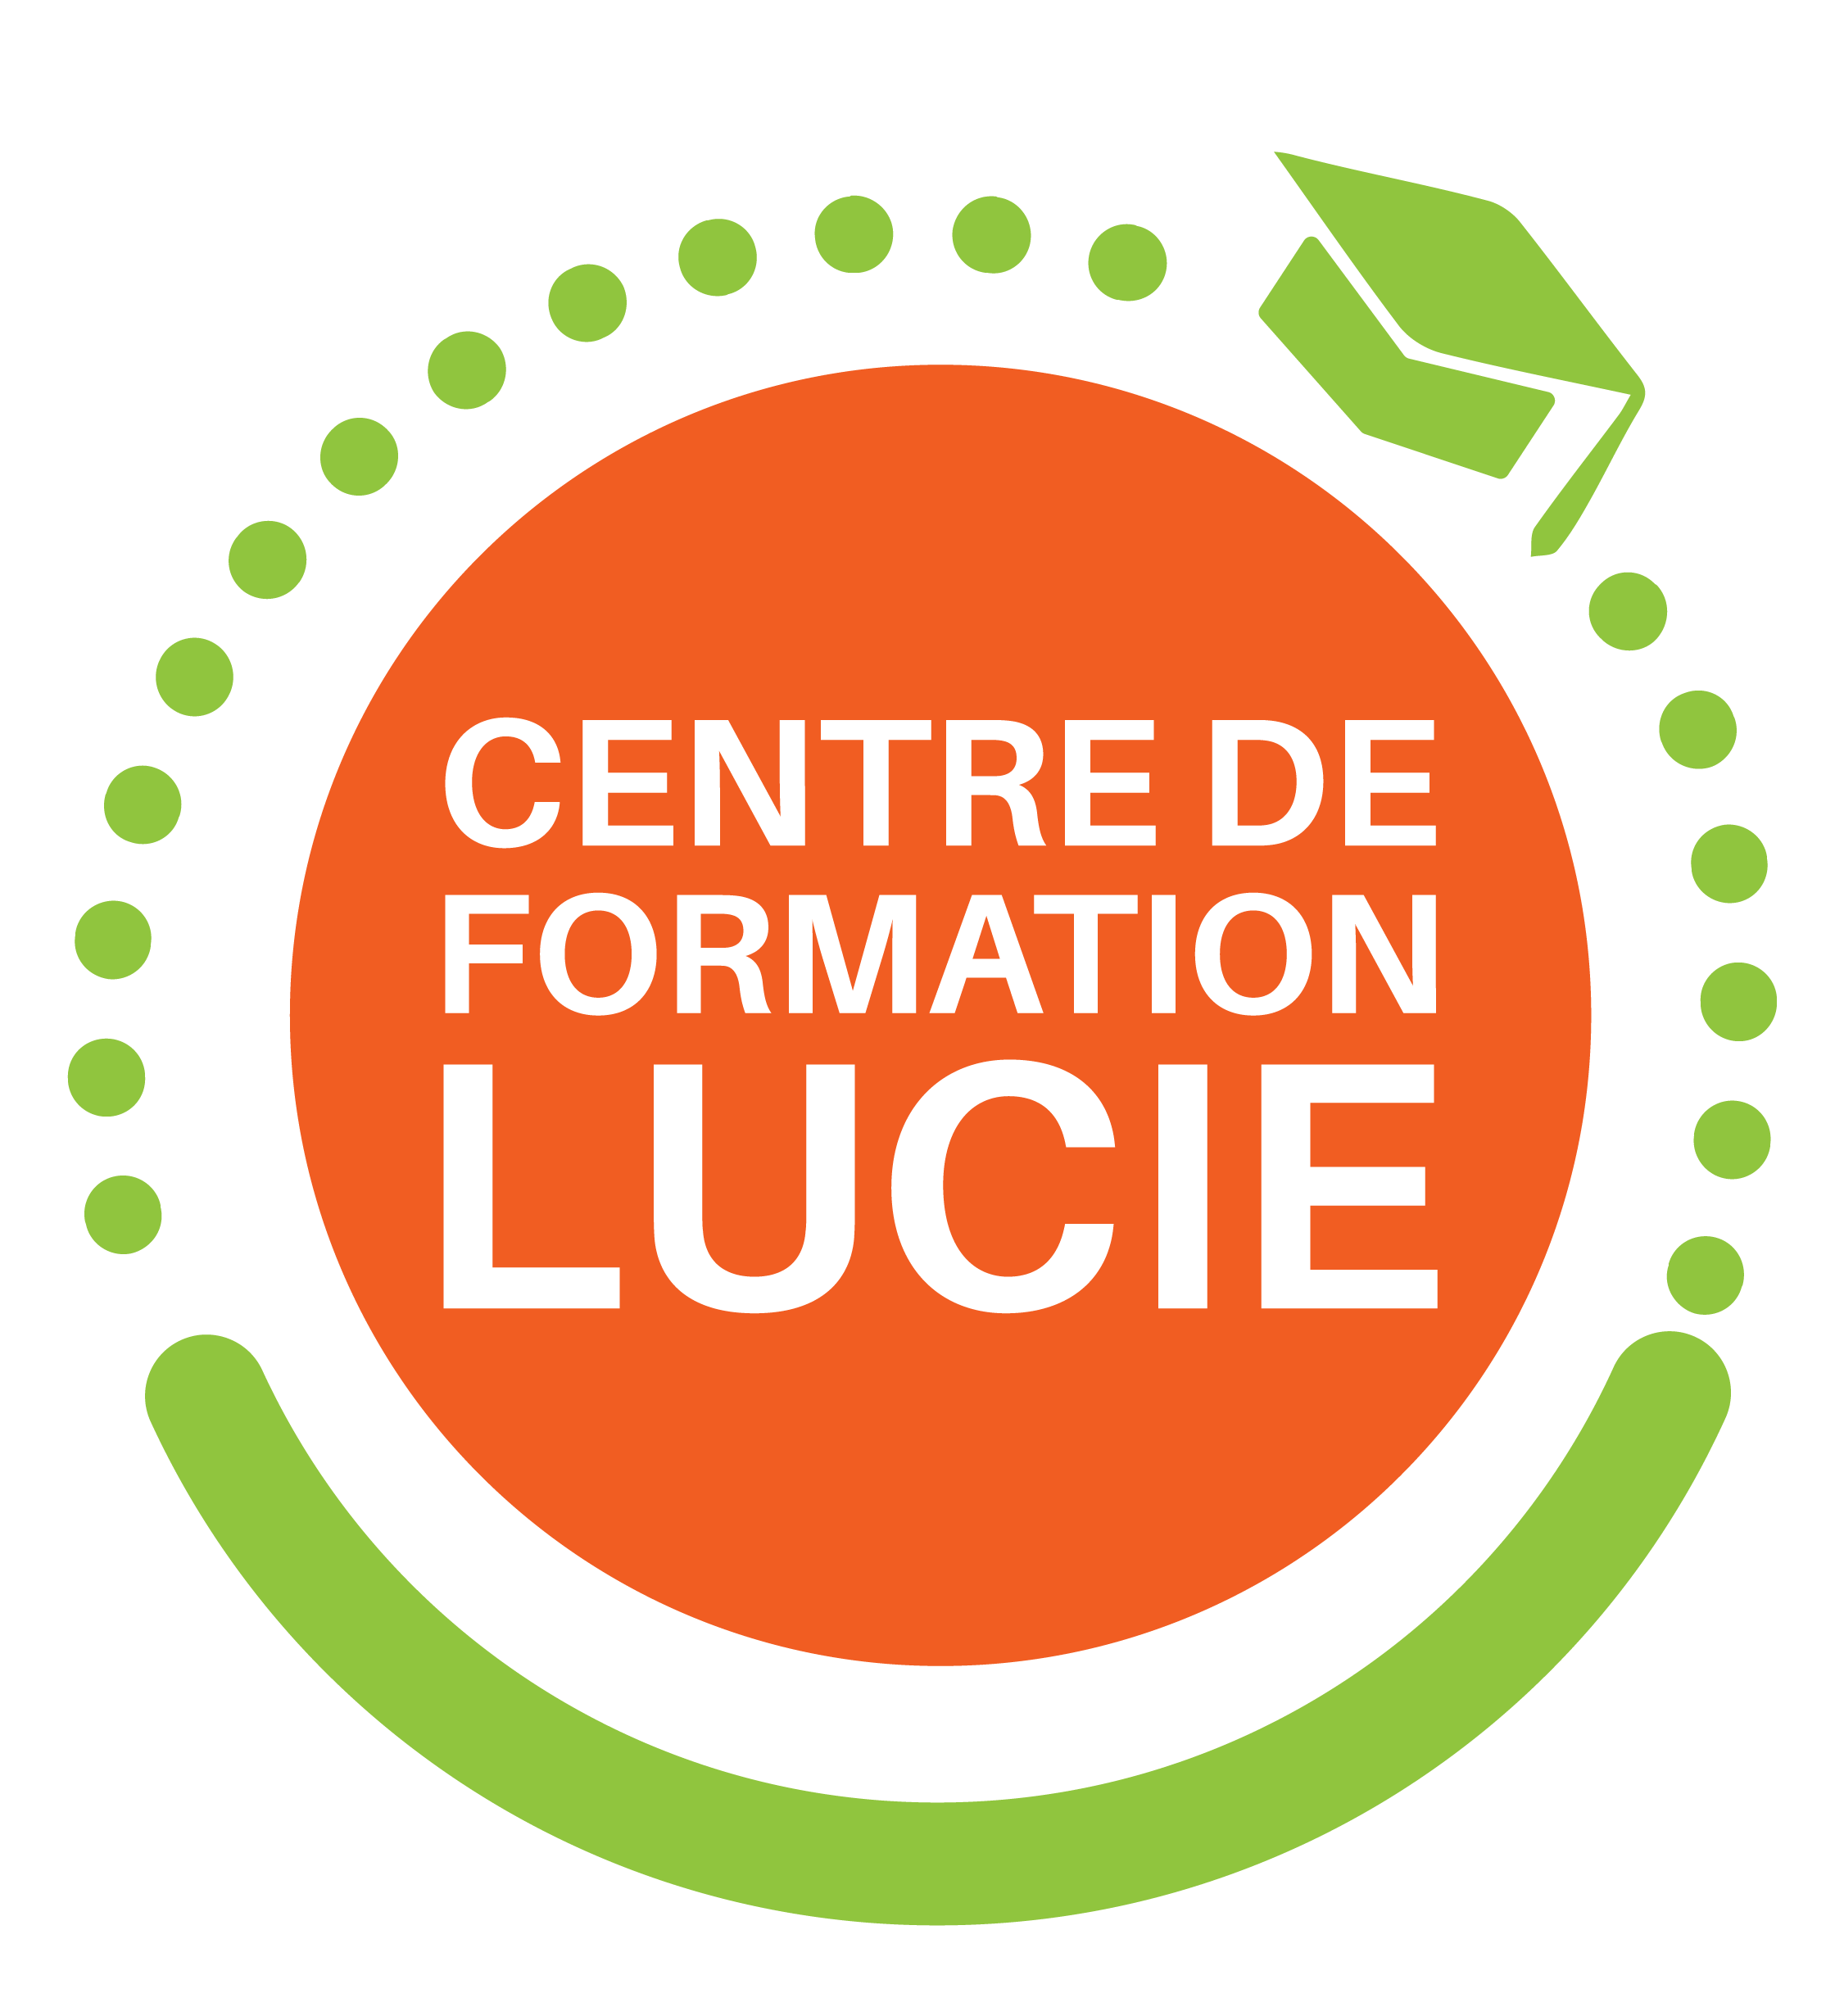 Agence LUCIE